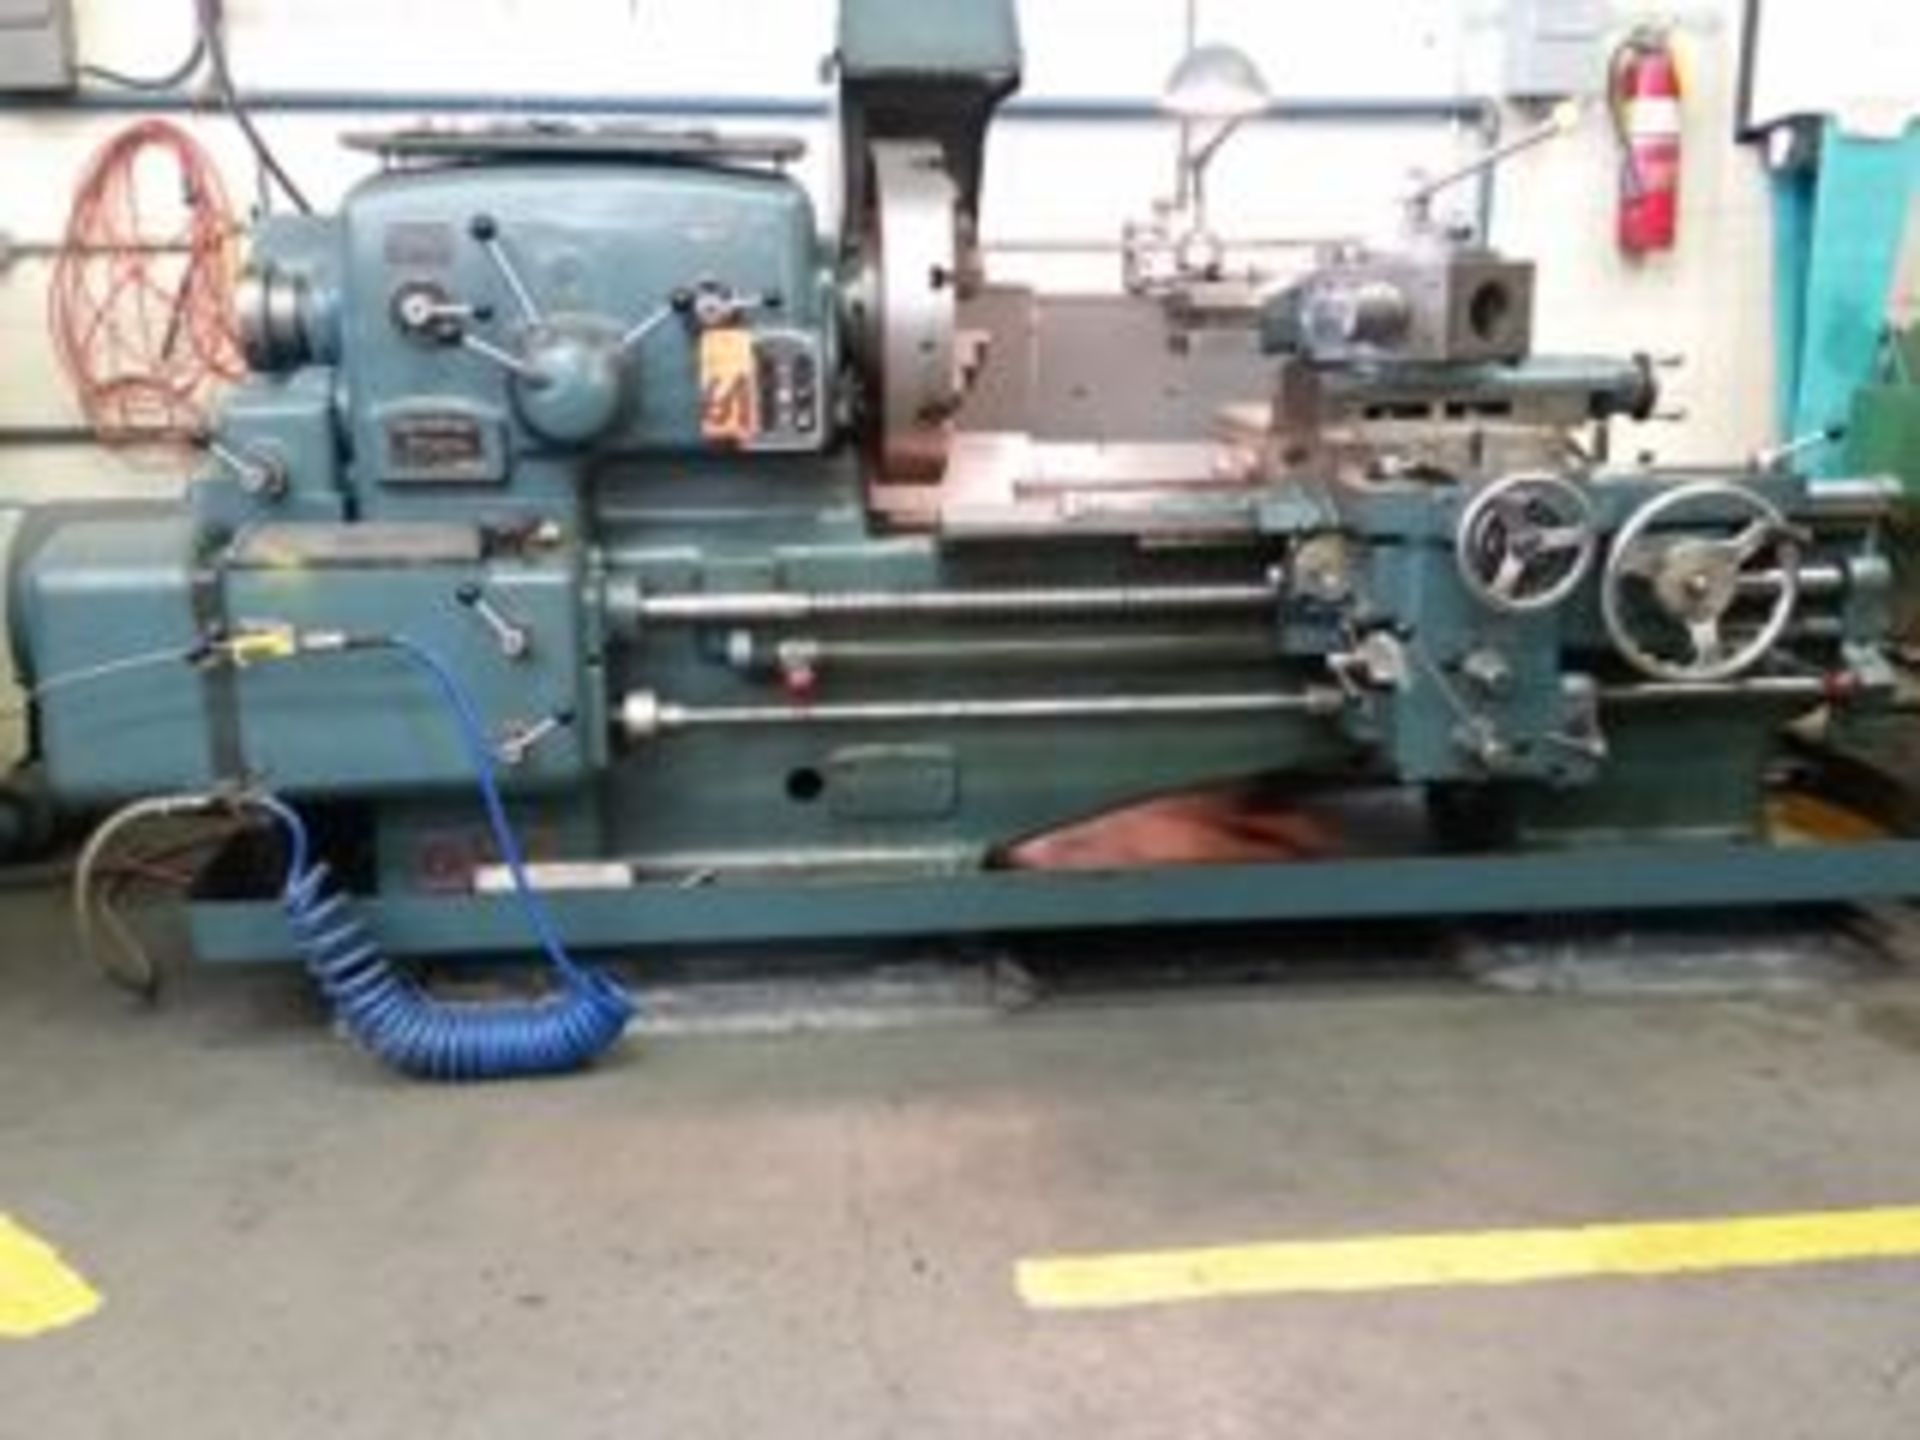 Dean Smith & Grace Turret Lathe 3-1/2" spindle bore 22"- 4-jaw chuck 24" swing coolant and full